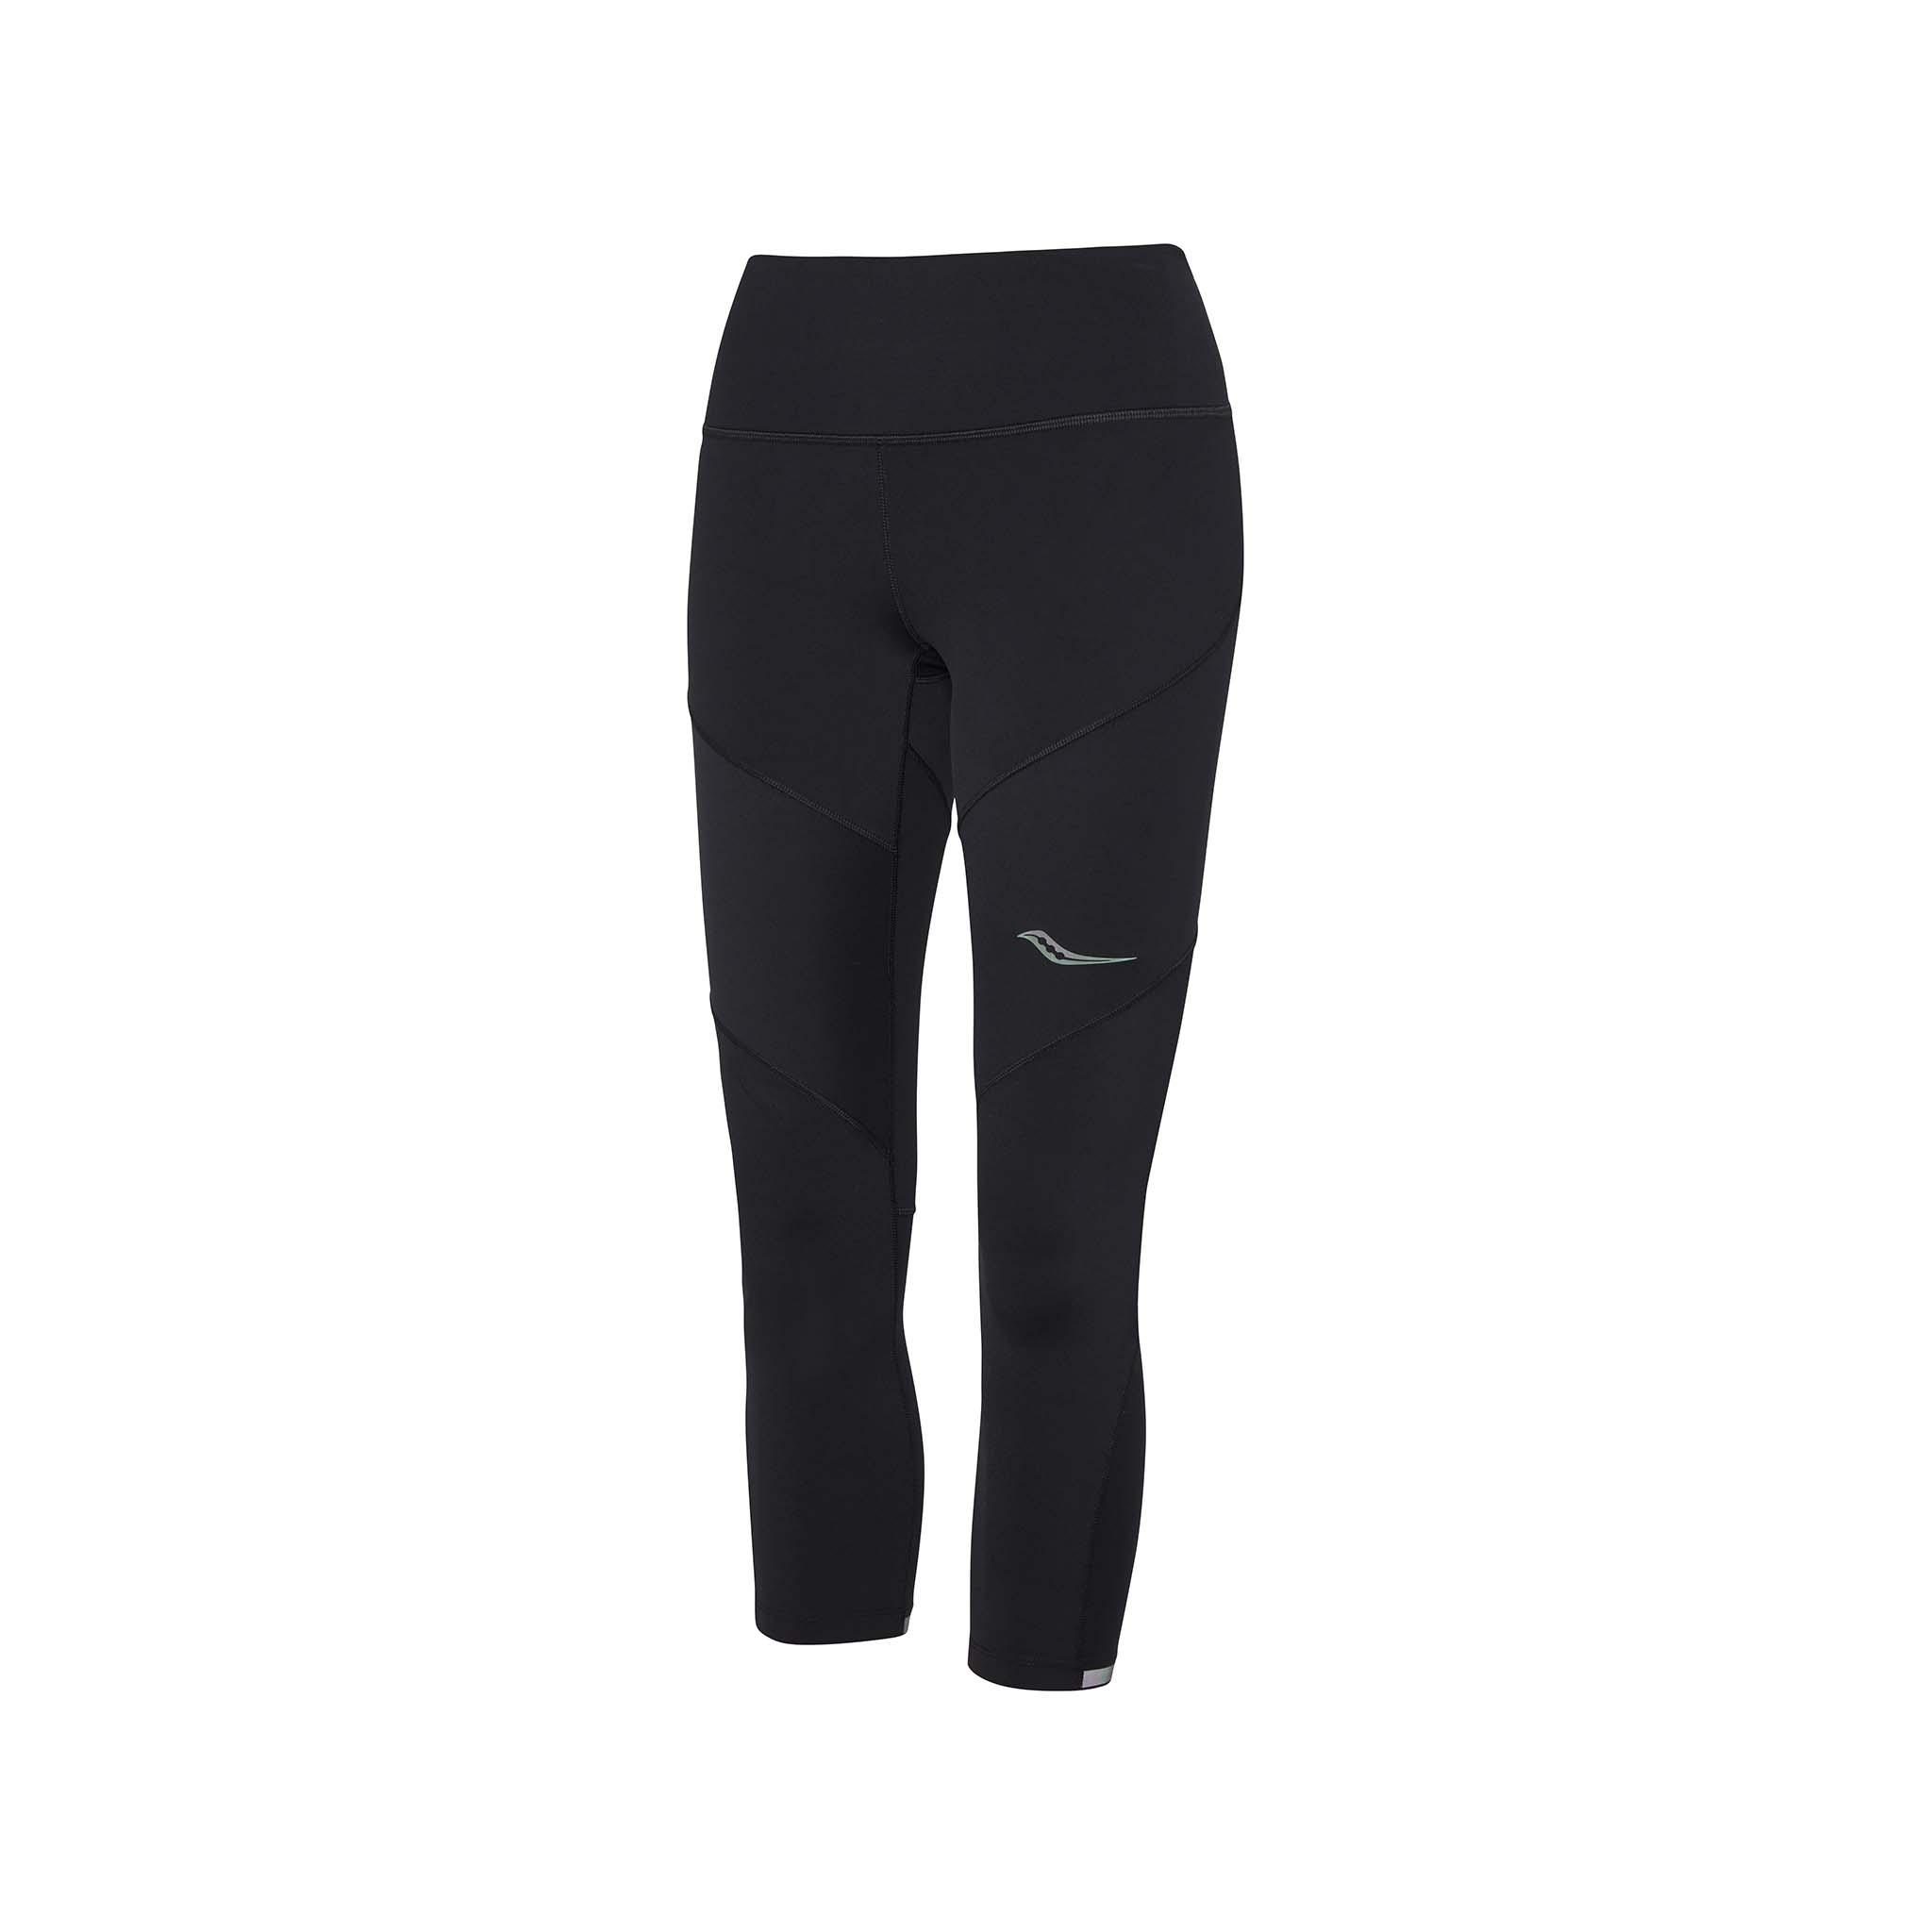 Saucony Time Trial Crop Tight running leggings for women - Soccer